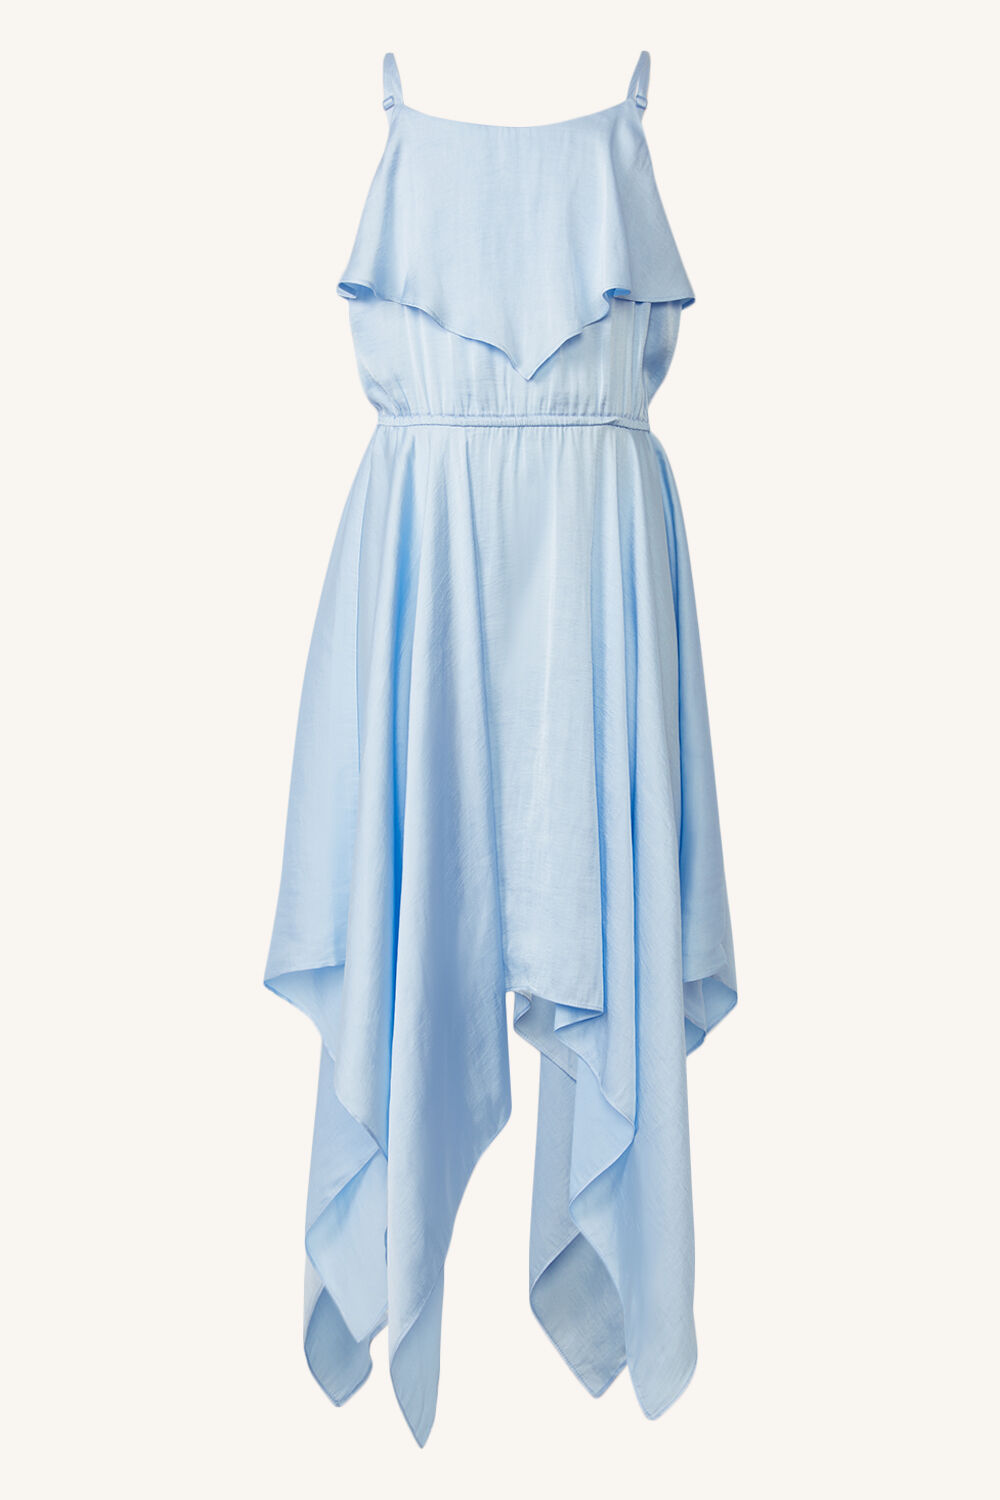 ADDY HANKY DRESS in colour CROWN BLUE